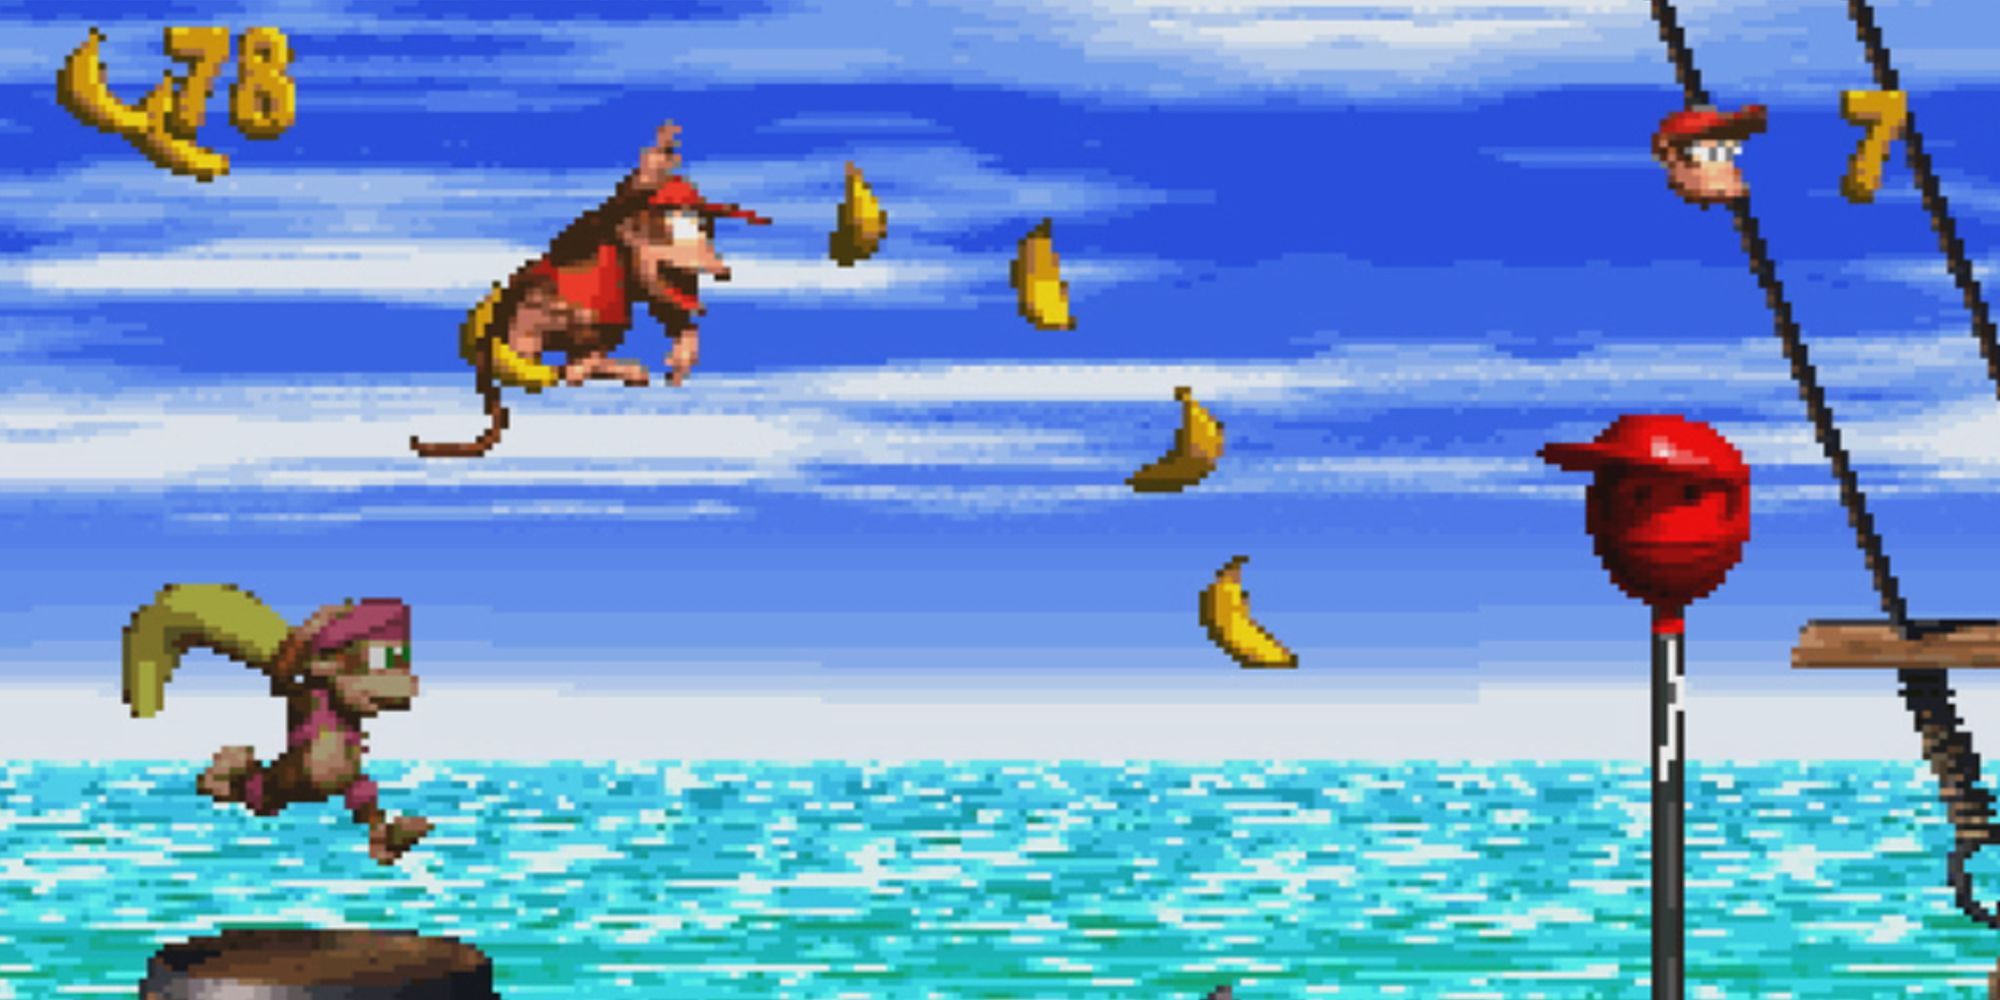 Dixie Kong and Diddy Kong in Donkey Kong Country 2: Diddy's Kong Quest